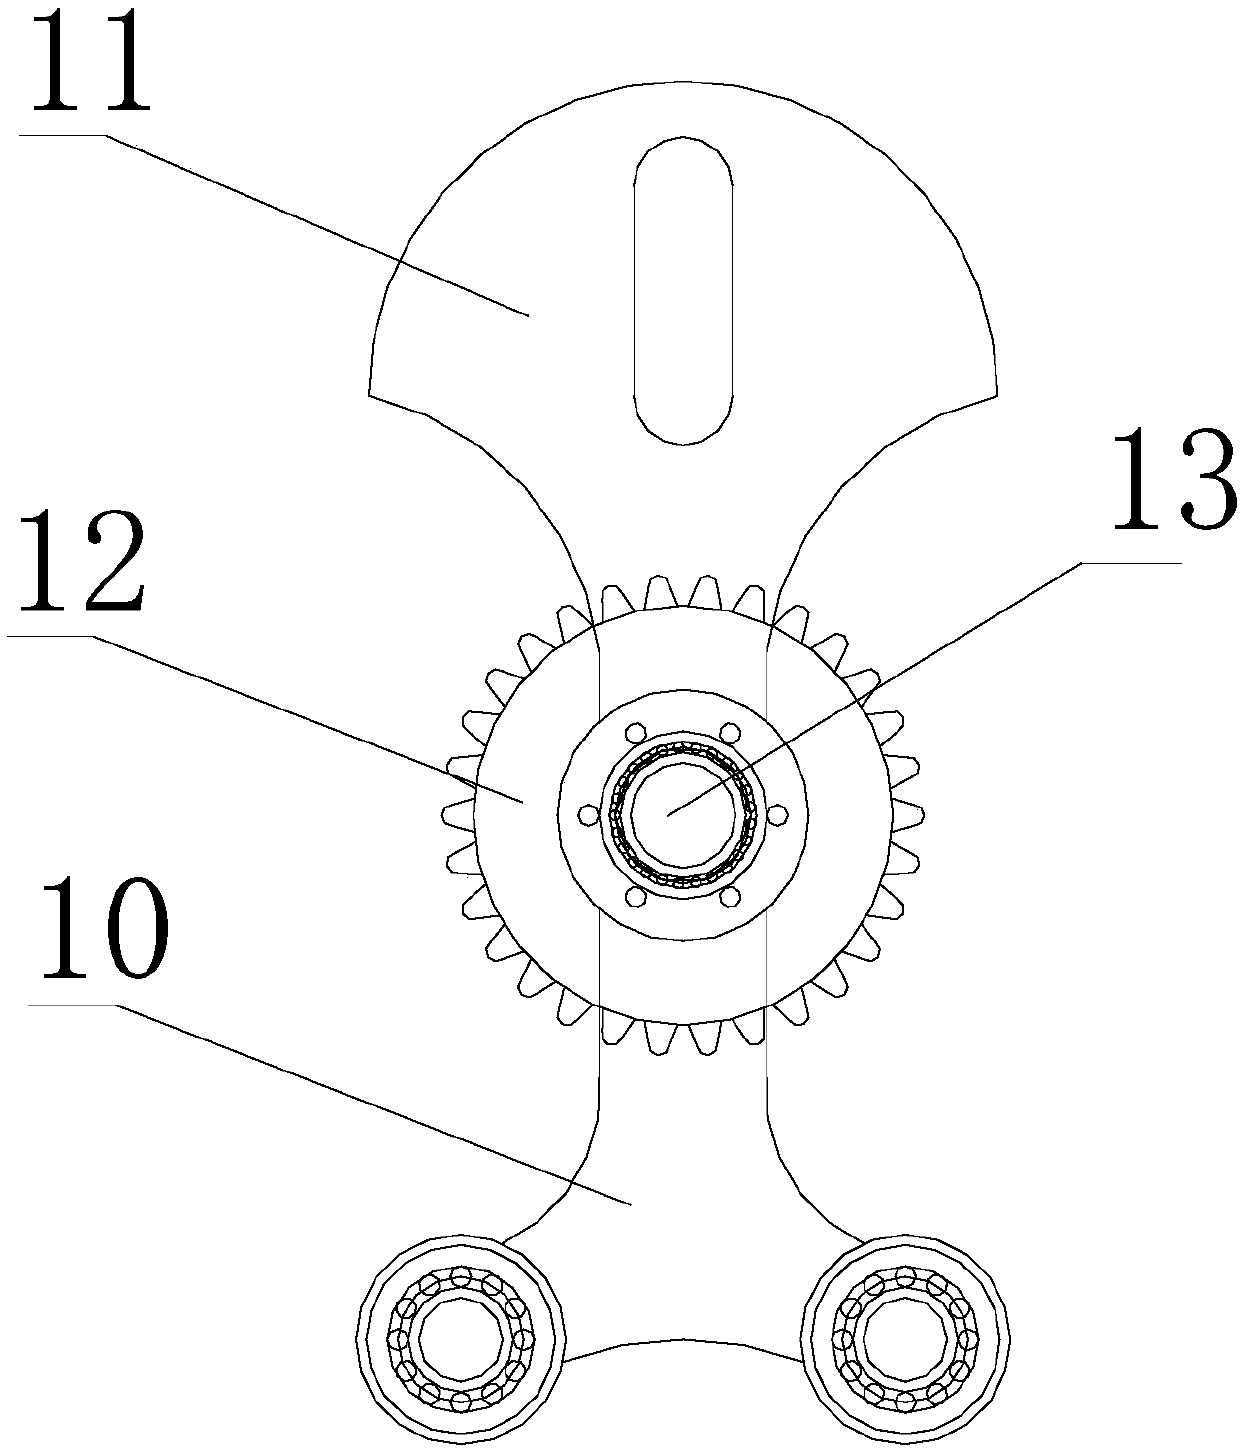 Circulation generator and transmission method capable of saving time and labor